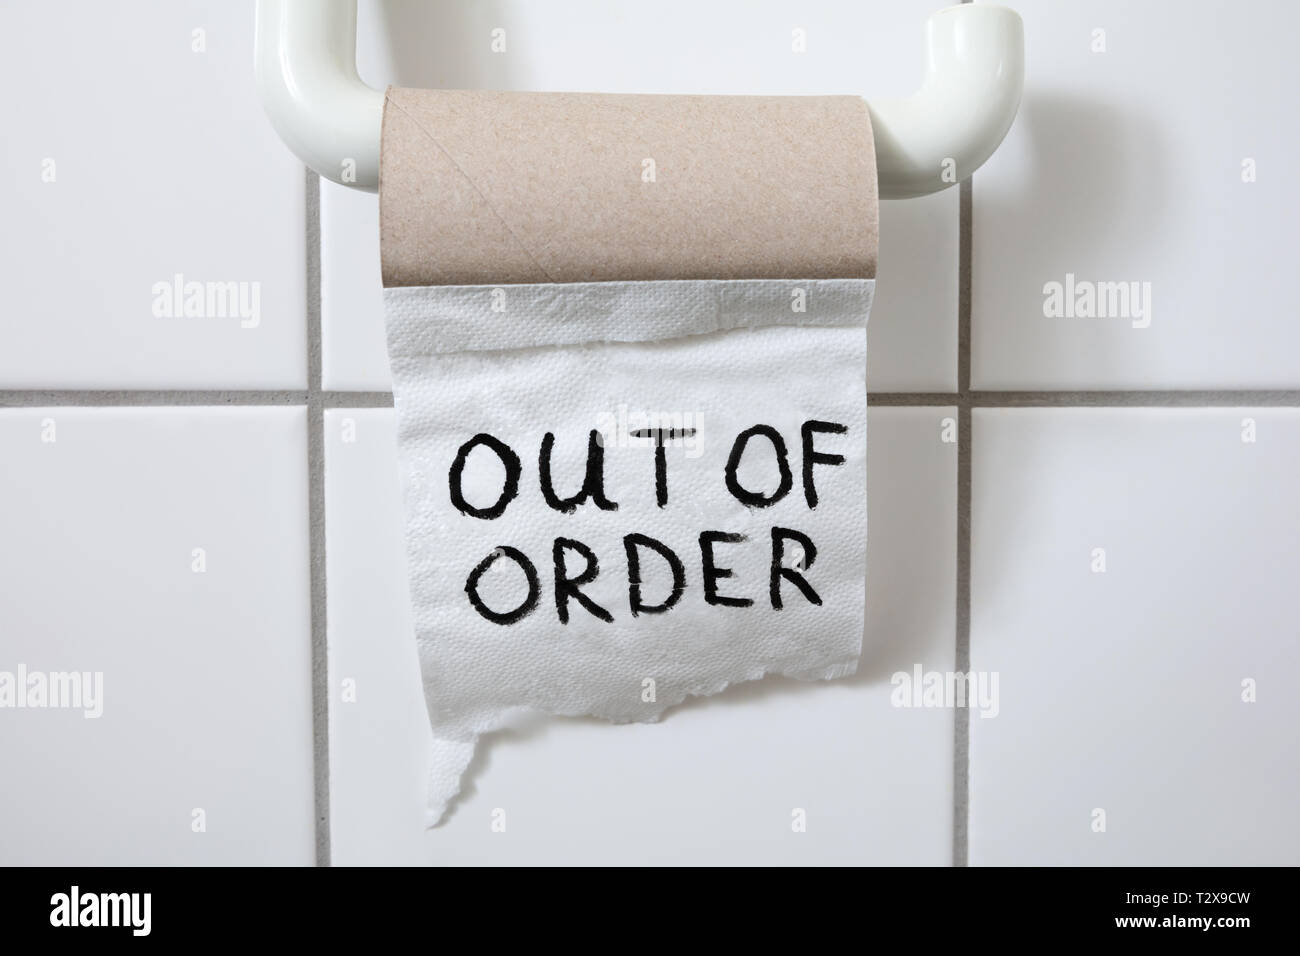 Written Text Out Of Order Message On Toilet Paper Roll In Bathroom Stock Photo